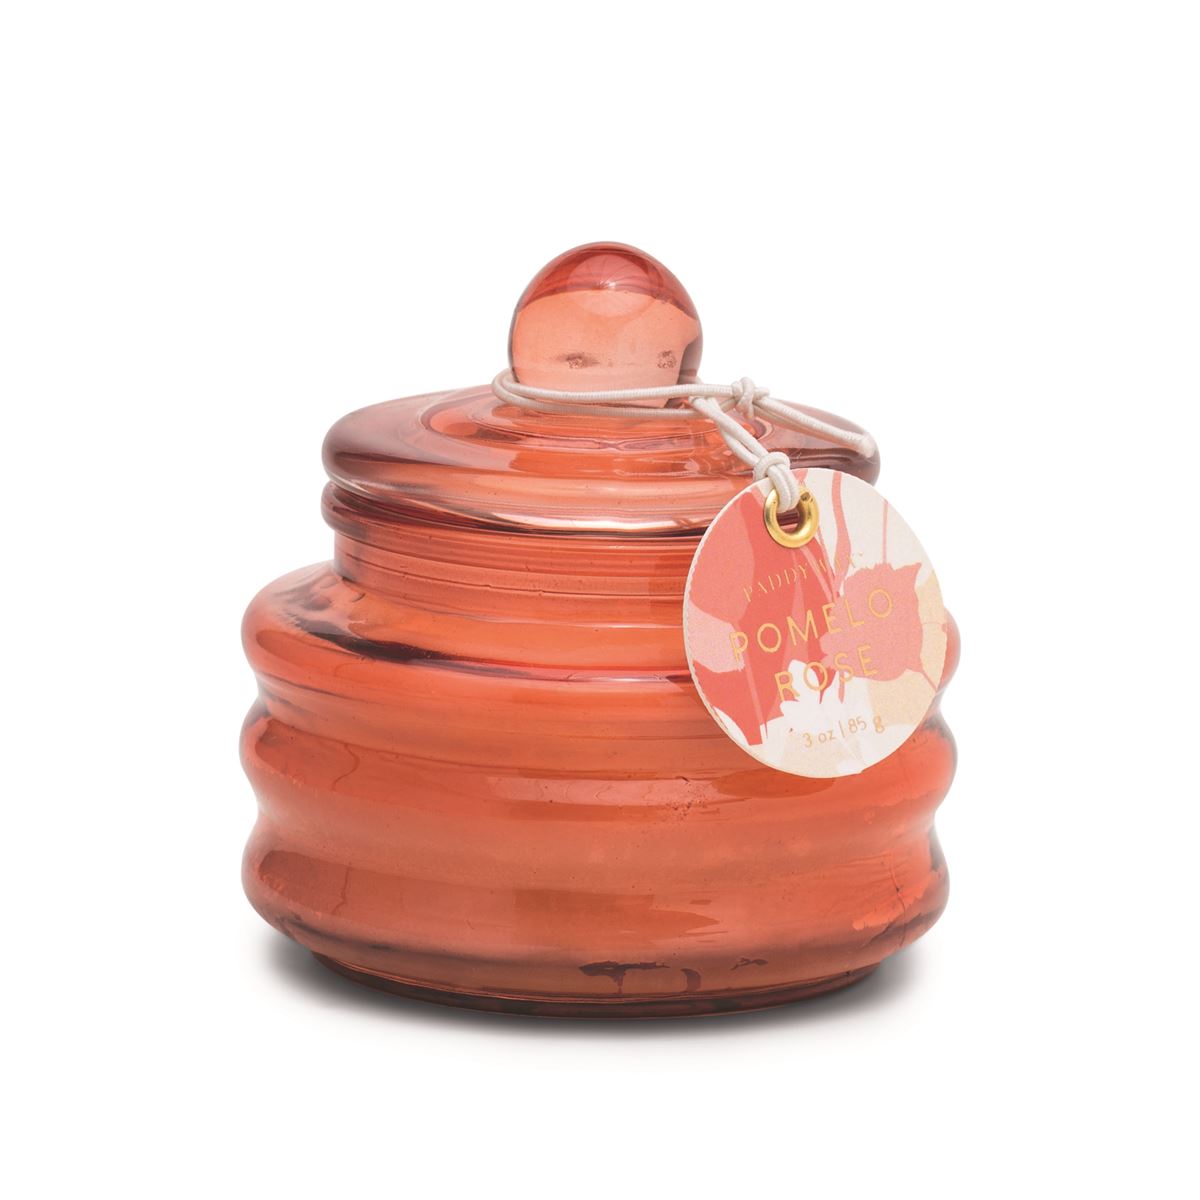 Beam 3oz Red Small Glass Vessel and Lid - Pomelo Rose